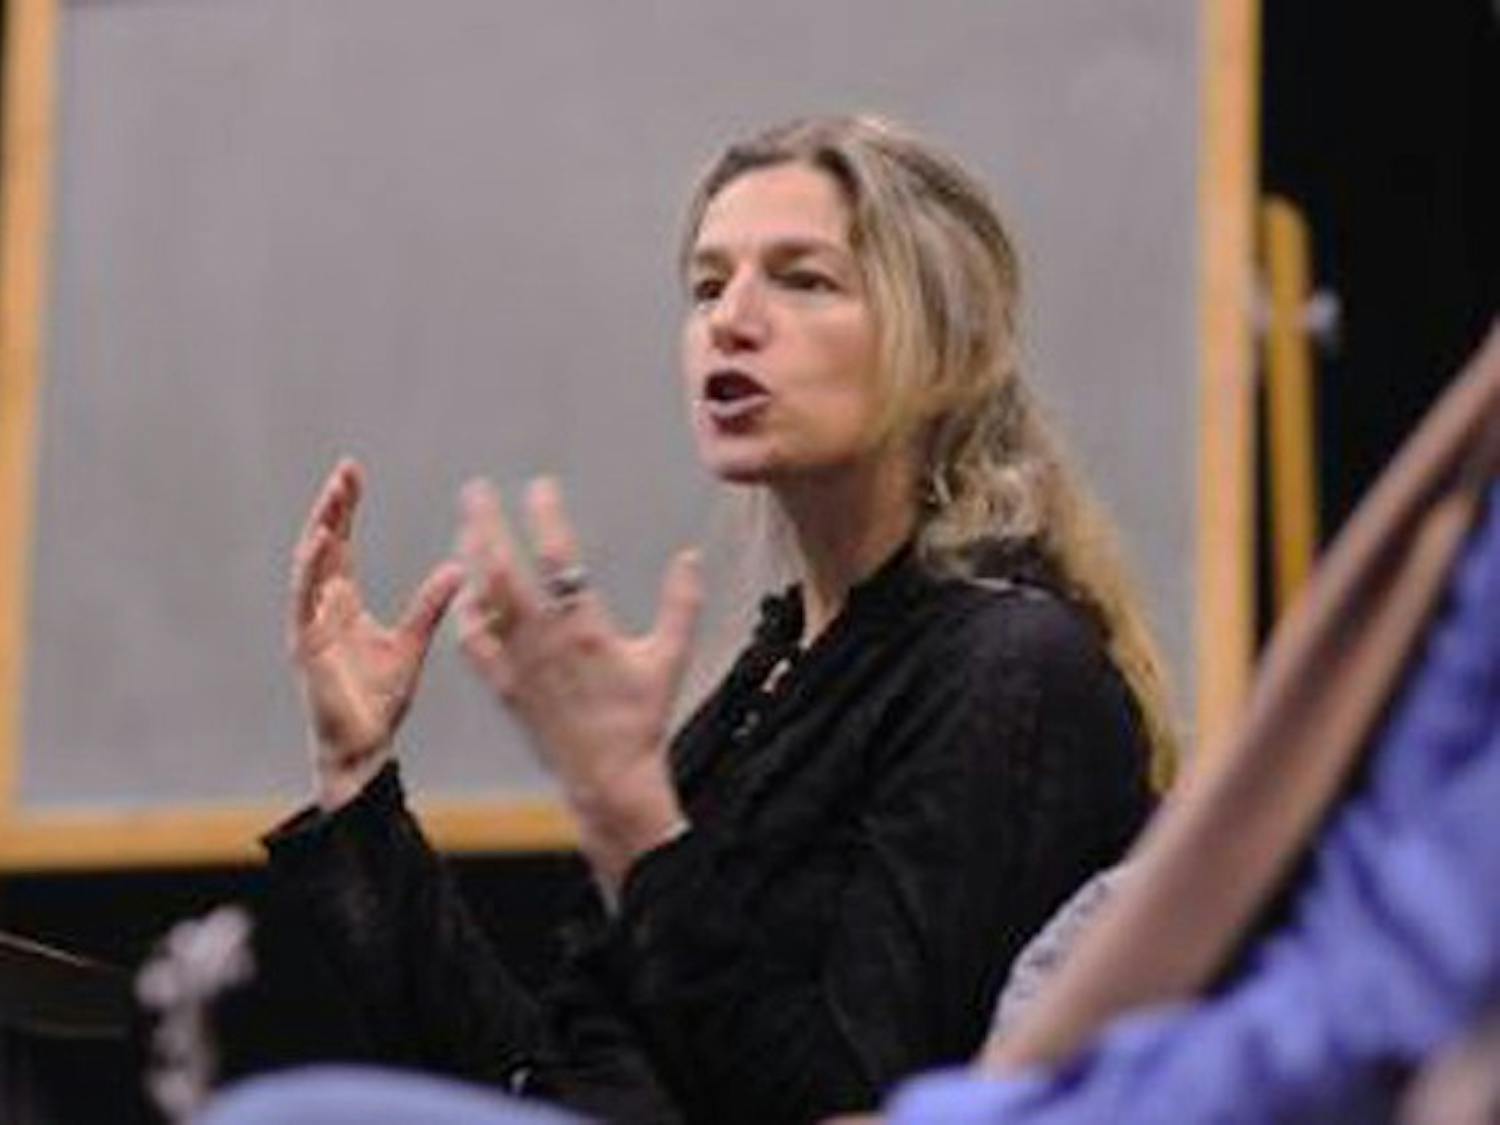 Filmmaker Ricki Stern '87 visited the College over Homecoming weekend to screen her latest film, 